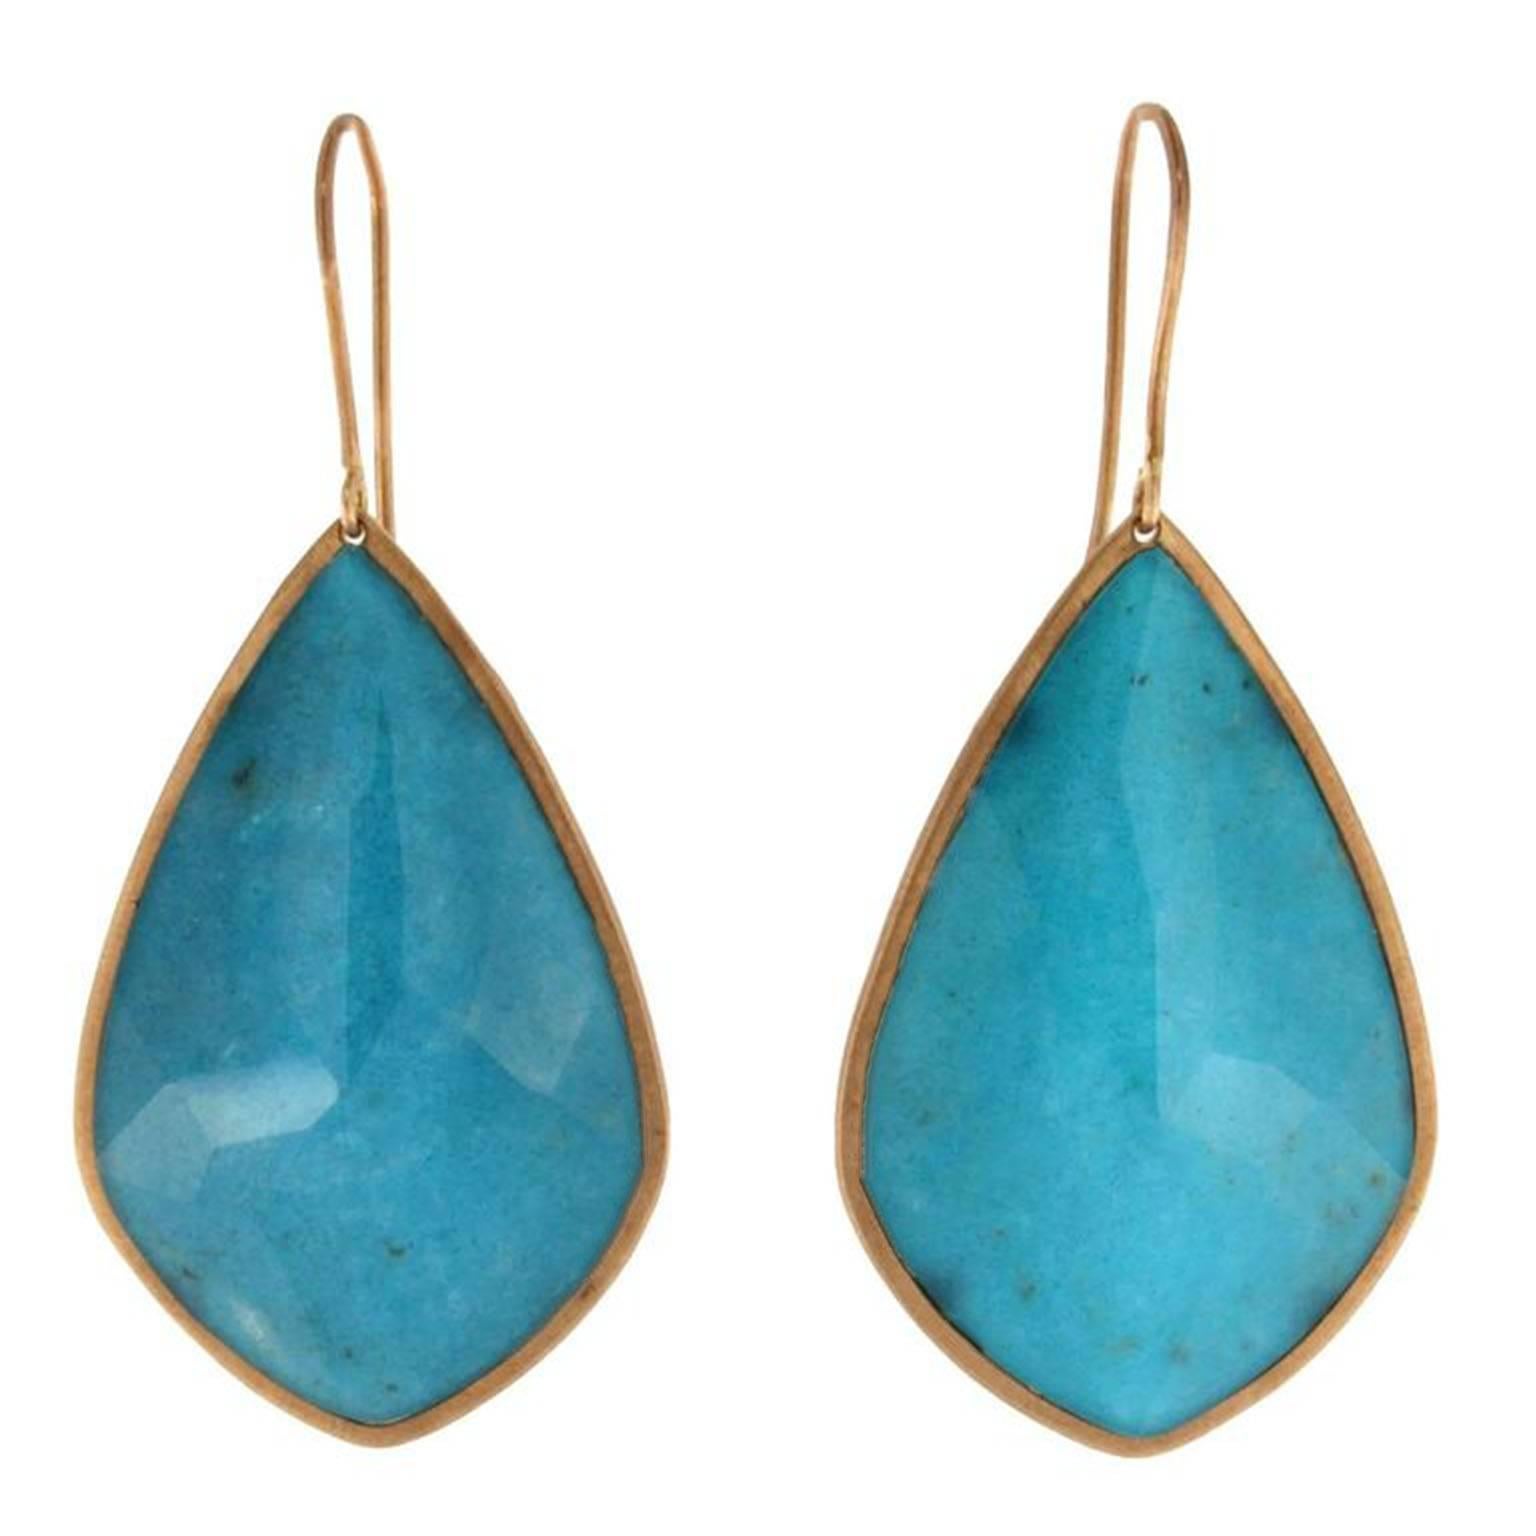 Jona design collection, hand crafted in Italy, 18 Karat rose gold drop earrings, set with quartz over turquoise, weighing 43.67 carats. 

All Jona jewelry is new and has never been previously owned or worn. 